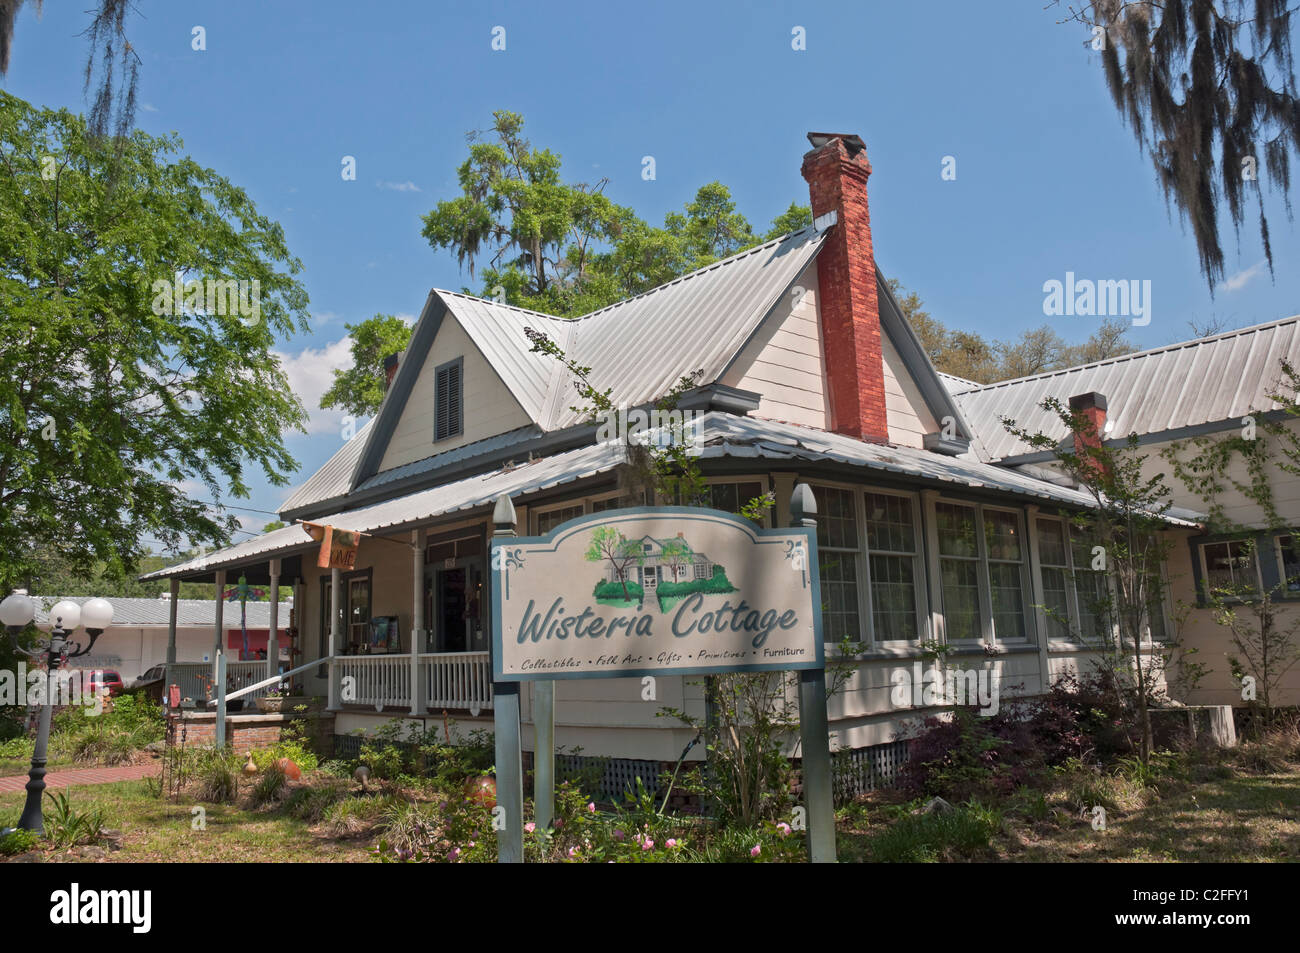 Wisteria Cottage in High Springs Florida sells collectibles and folk art. Stock Photo